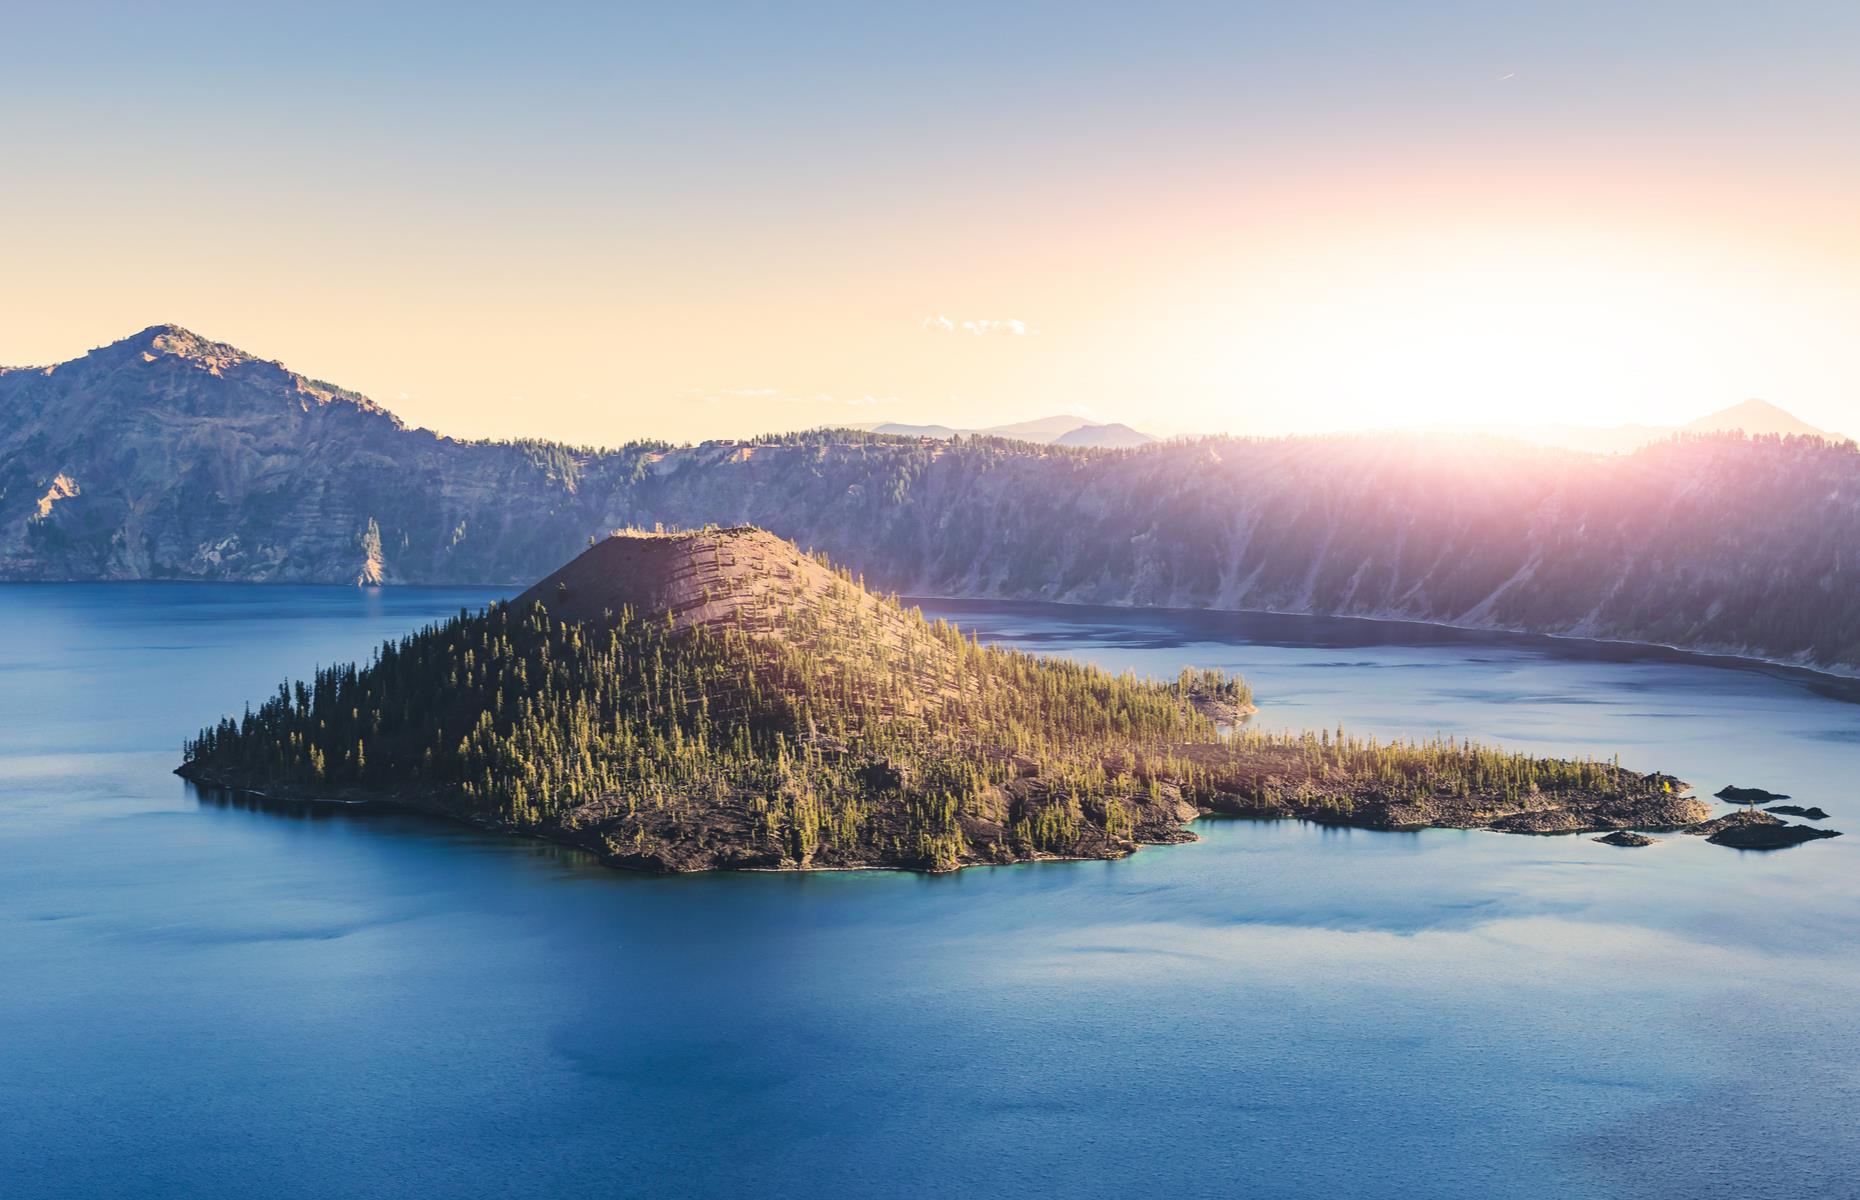 Slide 29 of 31: The lake was formed more than 7,000 years ago and is a collapsed volcano filled with rain and snowmelt. The cinder cone-shaped Wizard Island which rises in its center makes it even more distinctive. Now take a look at the most wonderful views in the world.